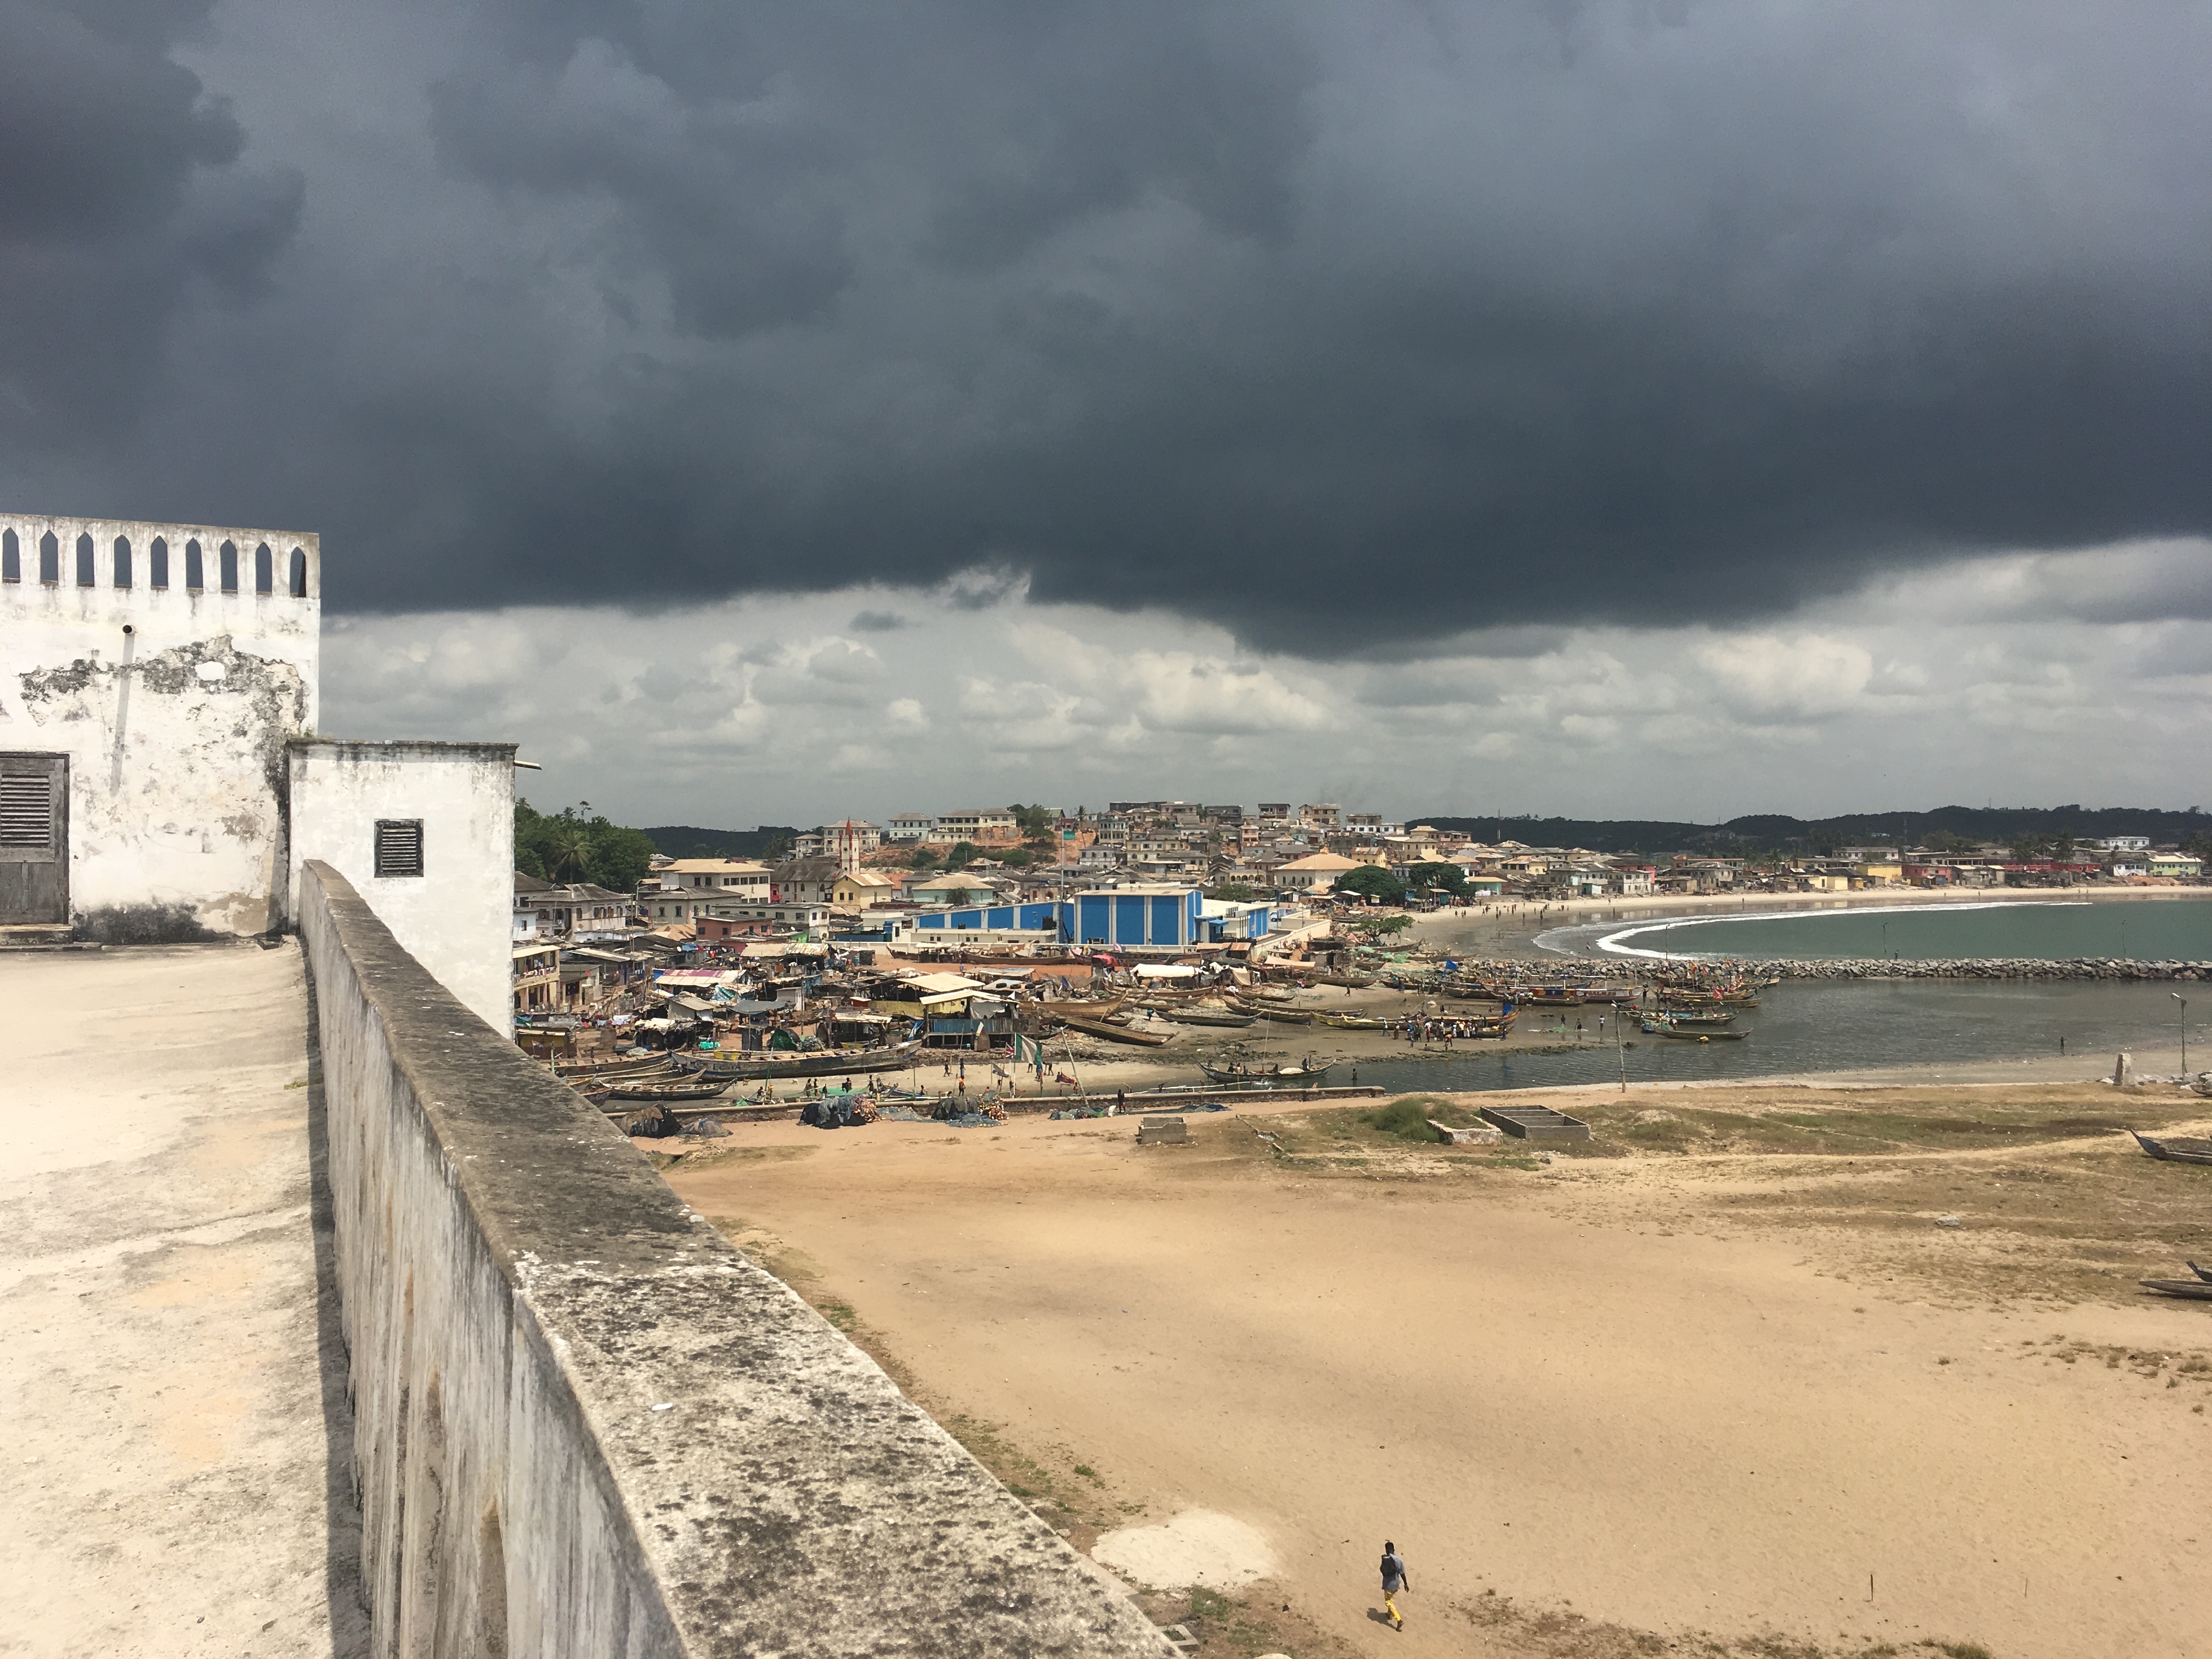 View of the town from Elmina Castle. Slave ships used to dock on the sandy shore to carry people to the Americas.